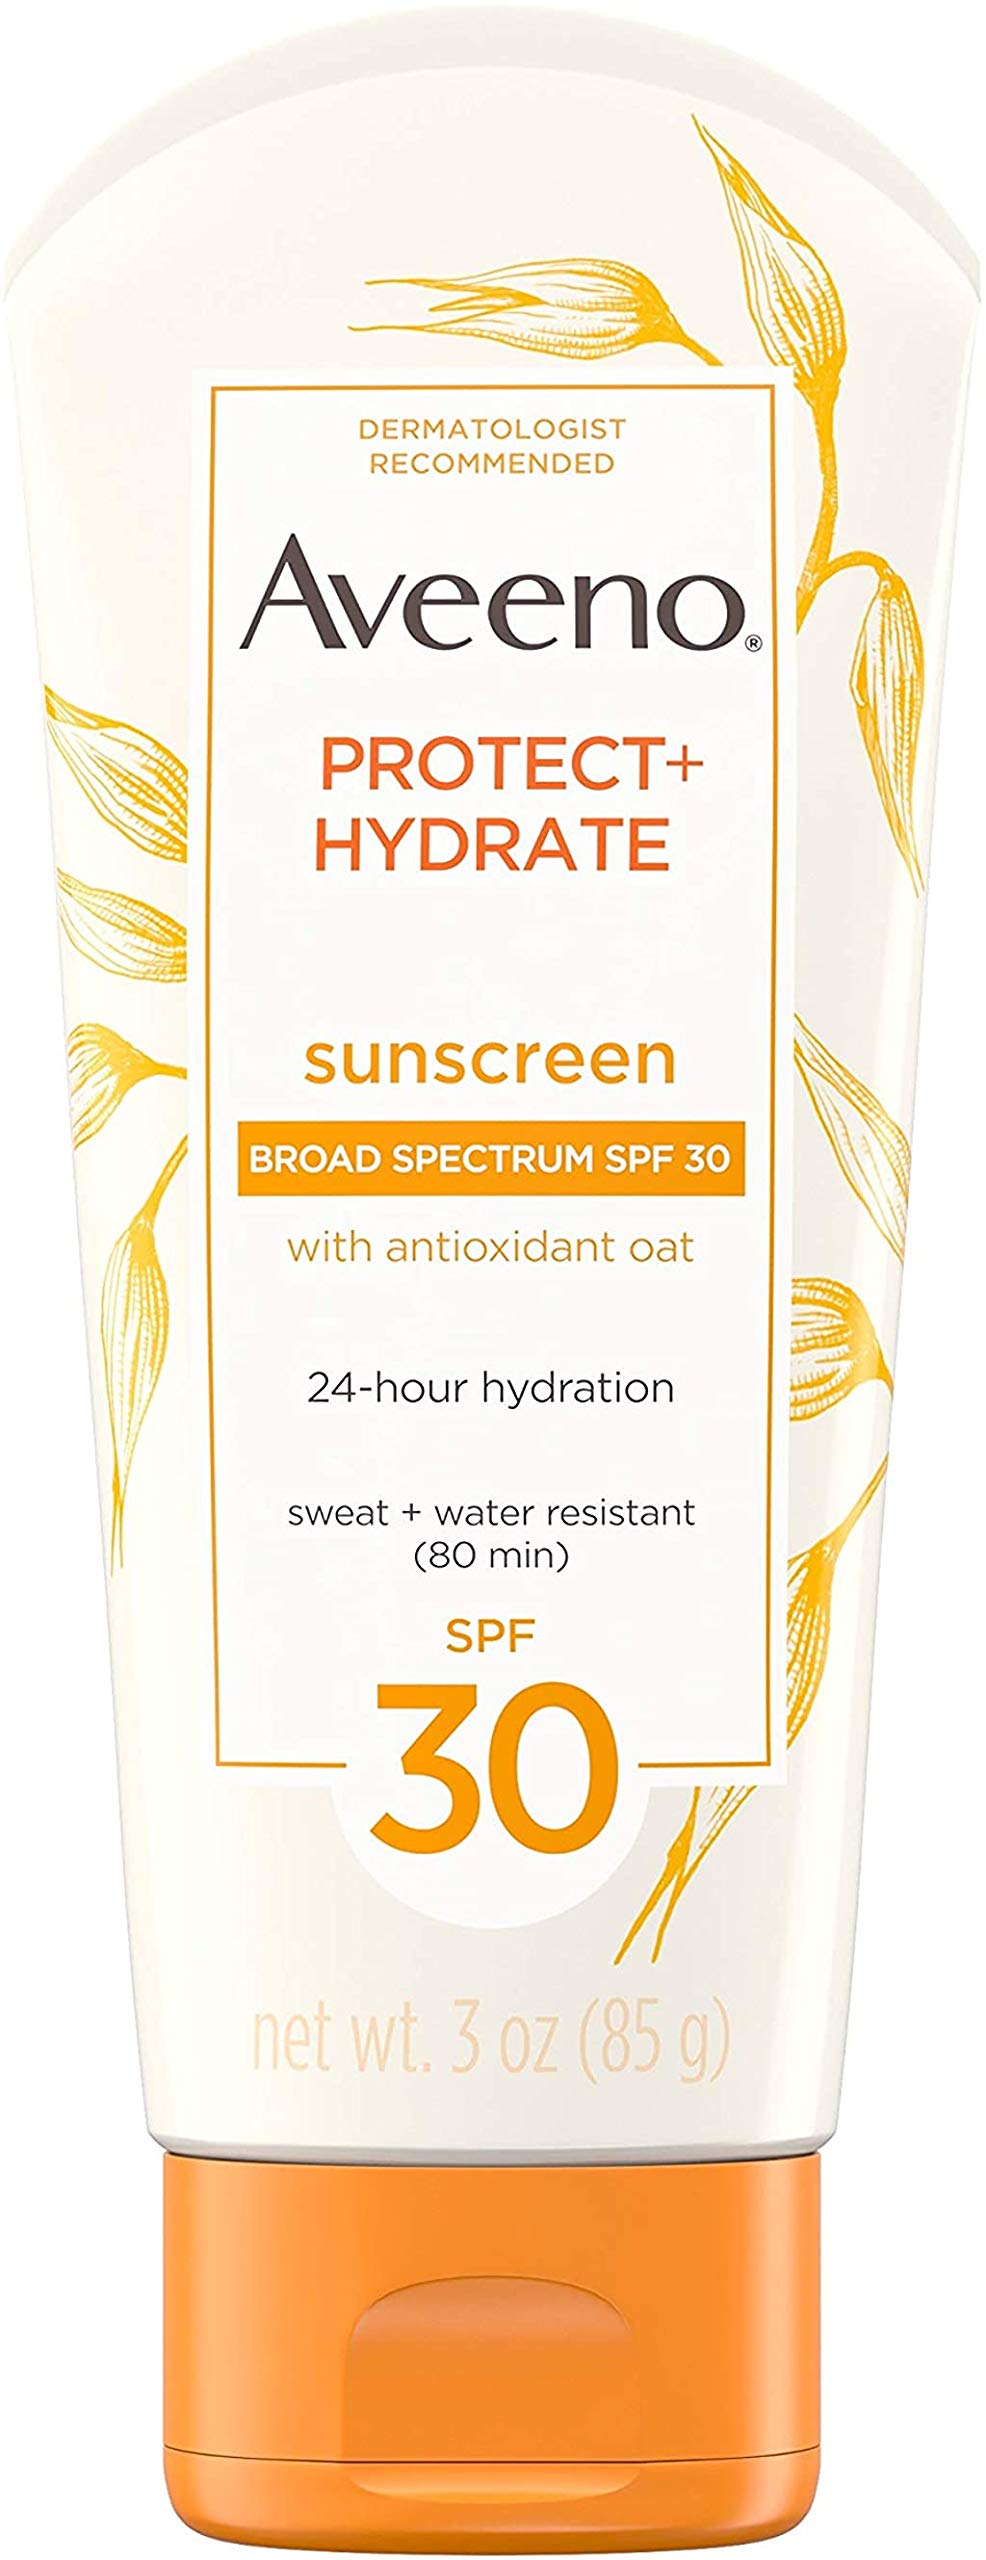 Aveeno Aveeno Protect + Hydrate Sunscreen Lotion with Broad Spectrum Protection SPF 30, Active Naturals Oat, Sweat and Water Resistant Sun Protection, 3 oz